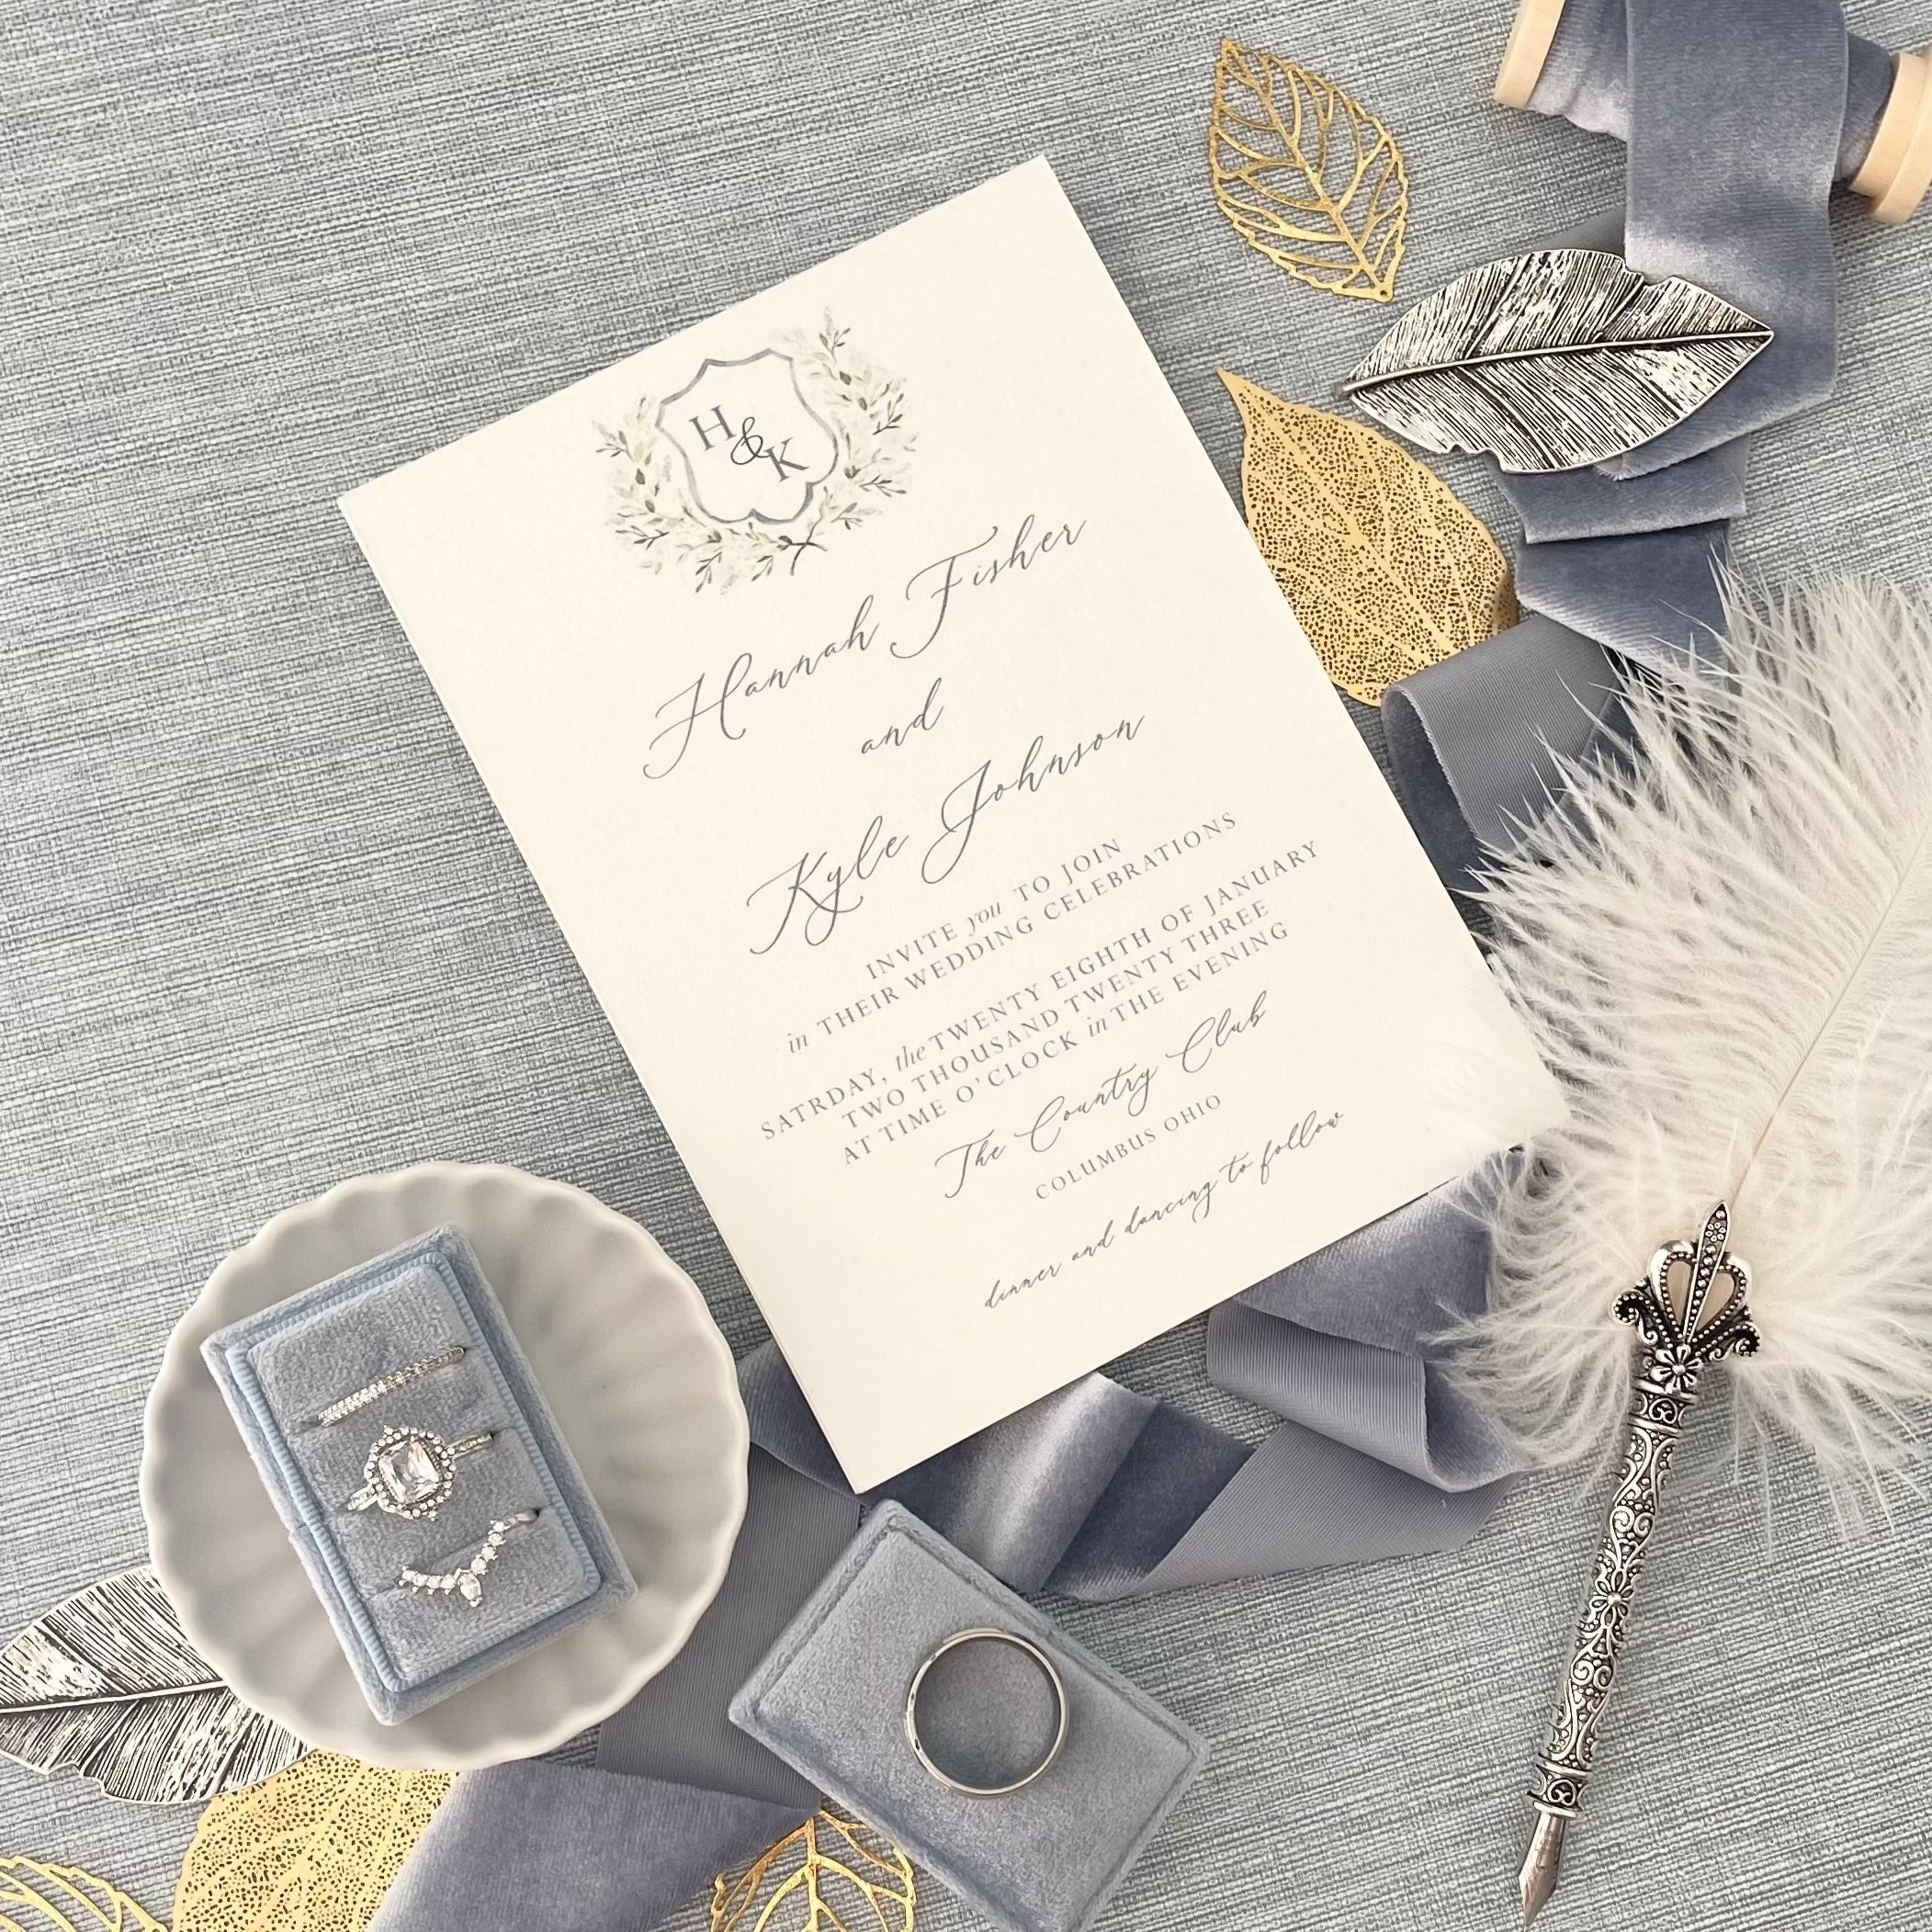 Dusty Blue 3 slot ring box styled with wedding invitation, dusty blue ribbon and vintage silver pen - Wedding Flat lay props from Champagne & GRIT